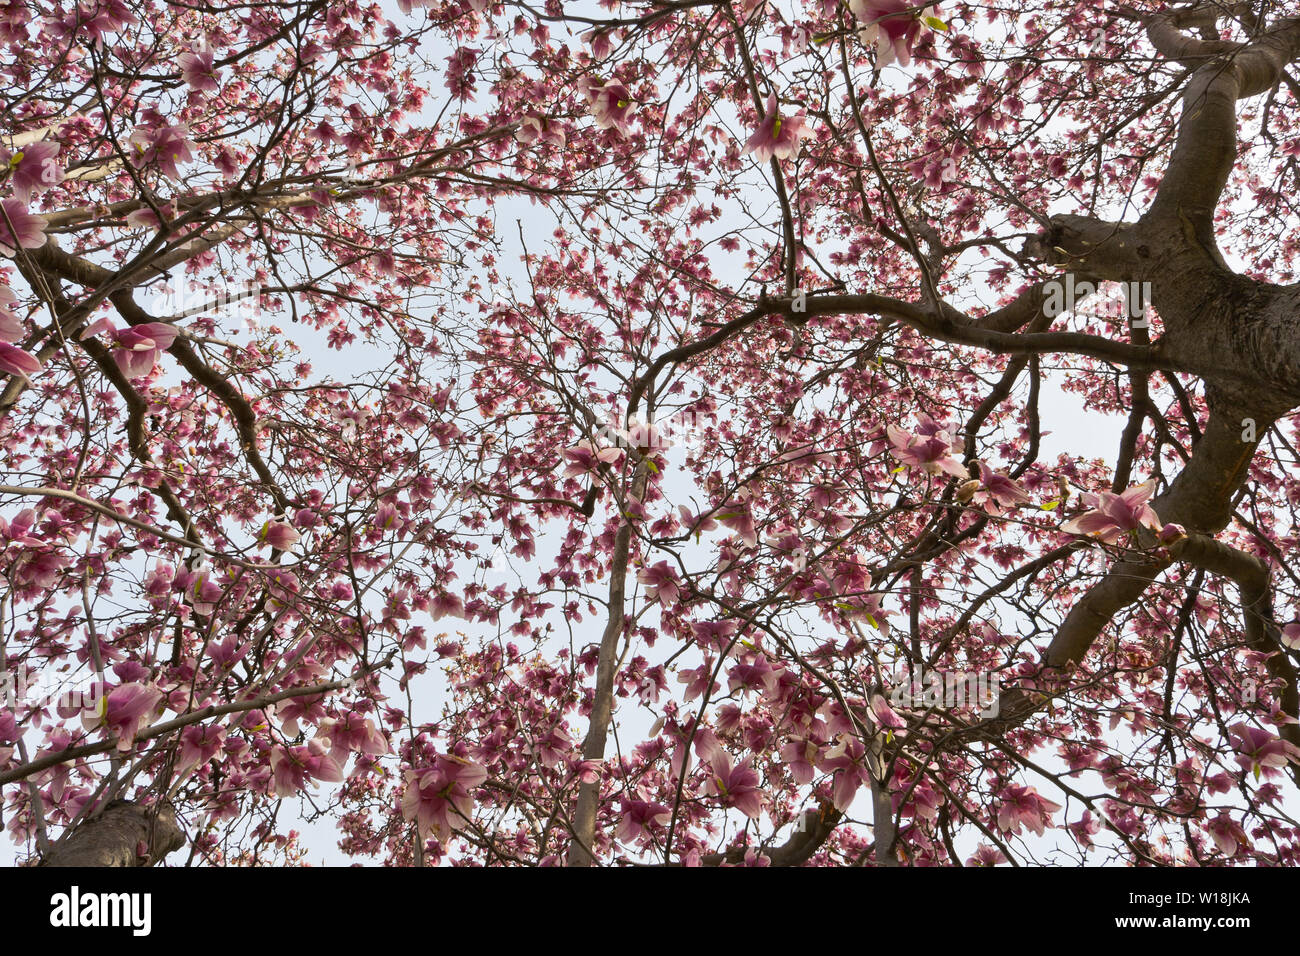 Looking up through the pink blossoms of a saucer magnolia tree's canopy at St. Louis County's Bella Fontaine Park on a spring morning. Stock Photo